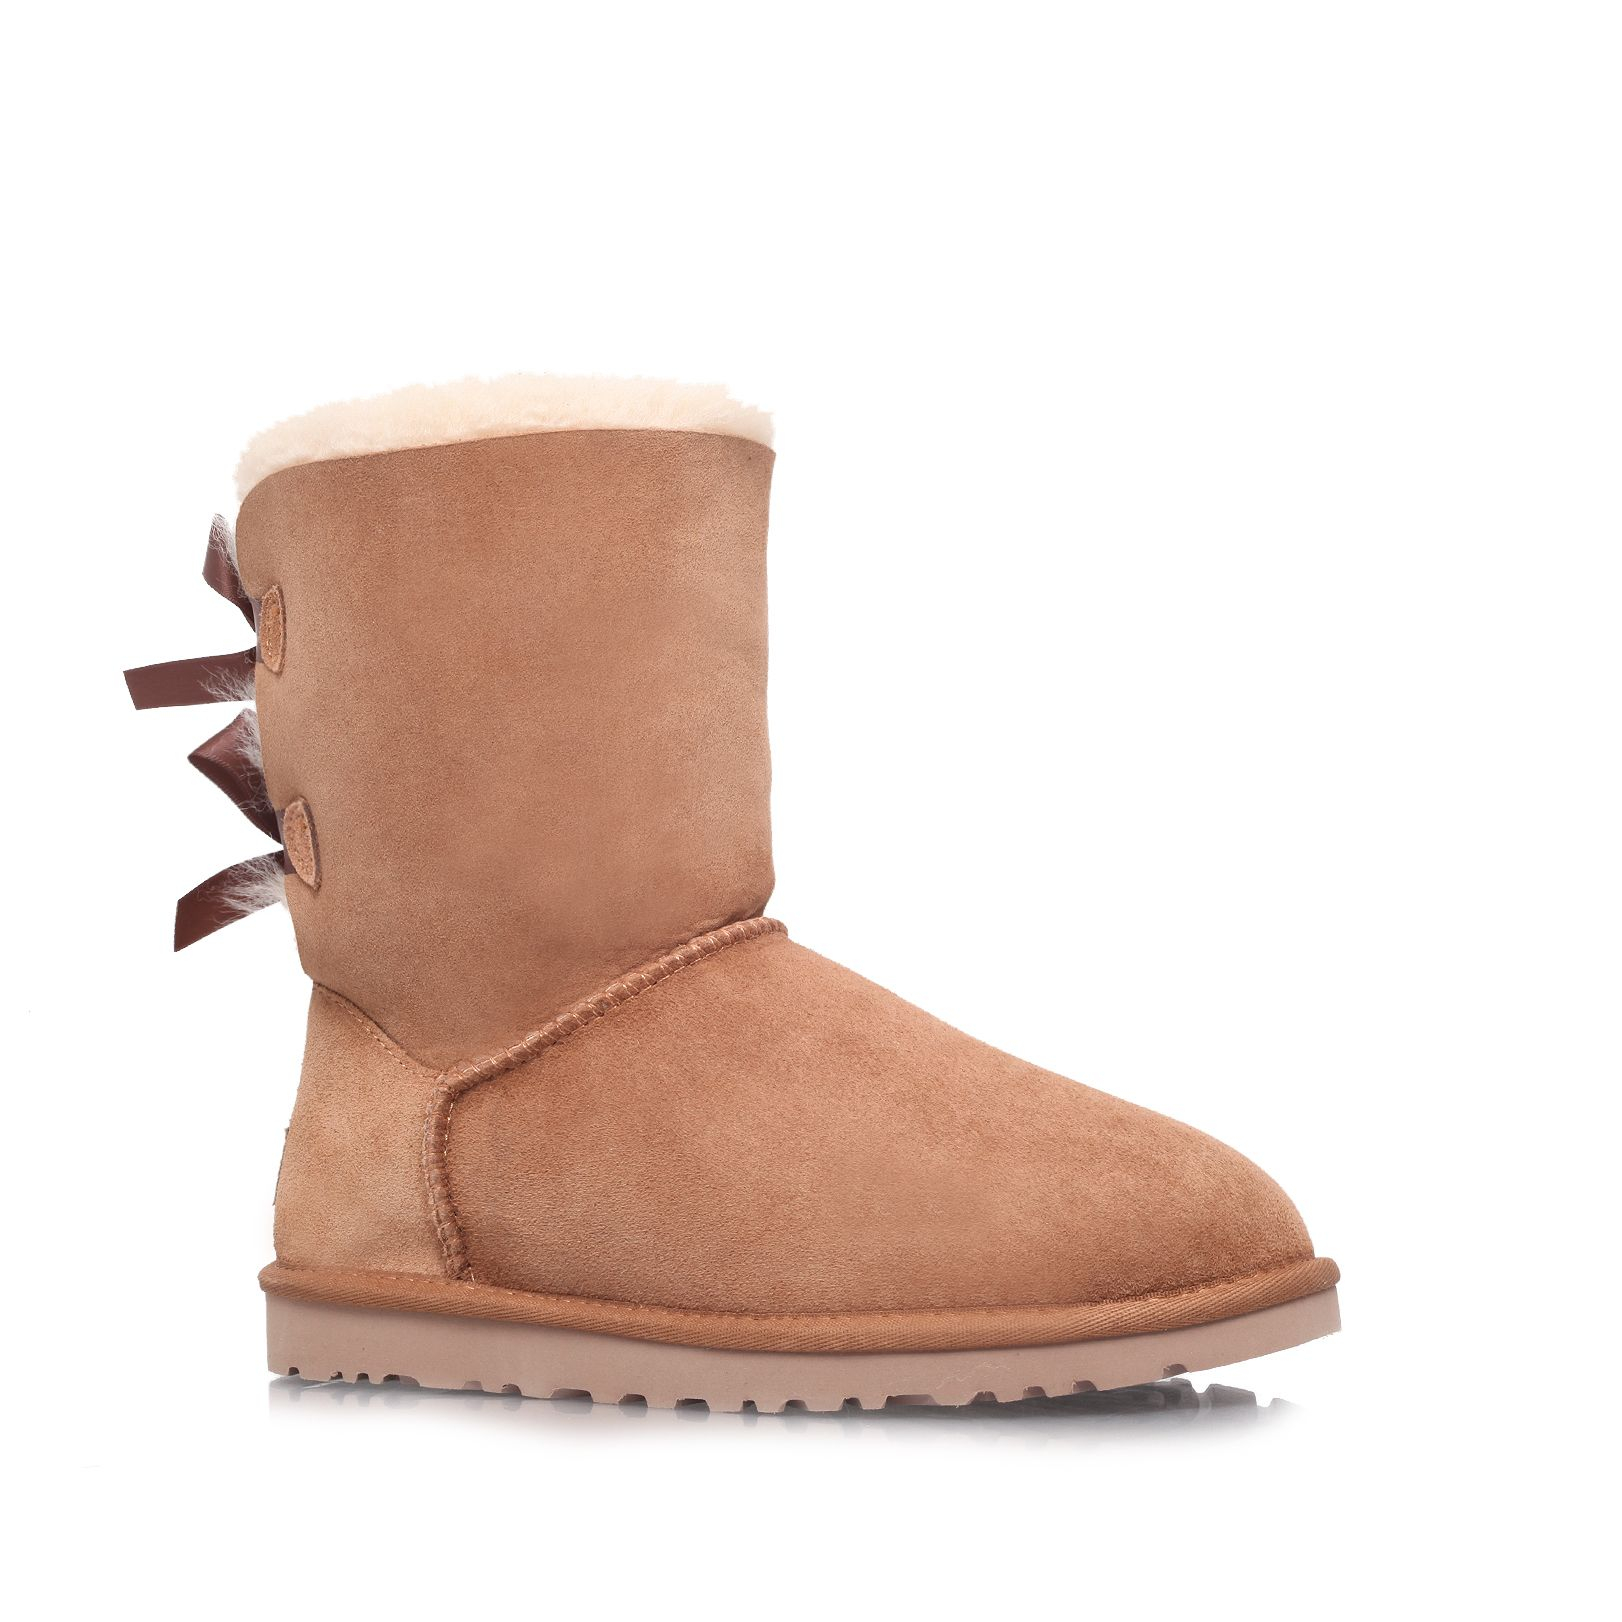 Ugg Bailey Bow Calf Boots in Brown | Lyst